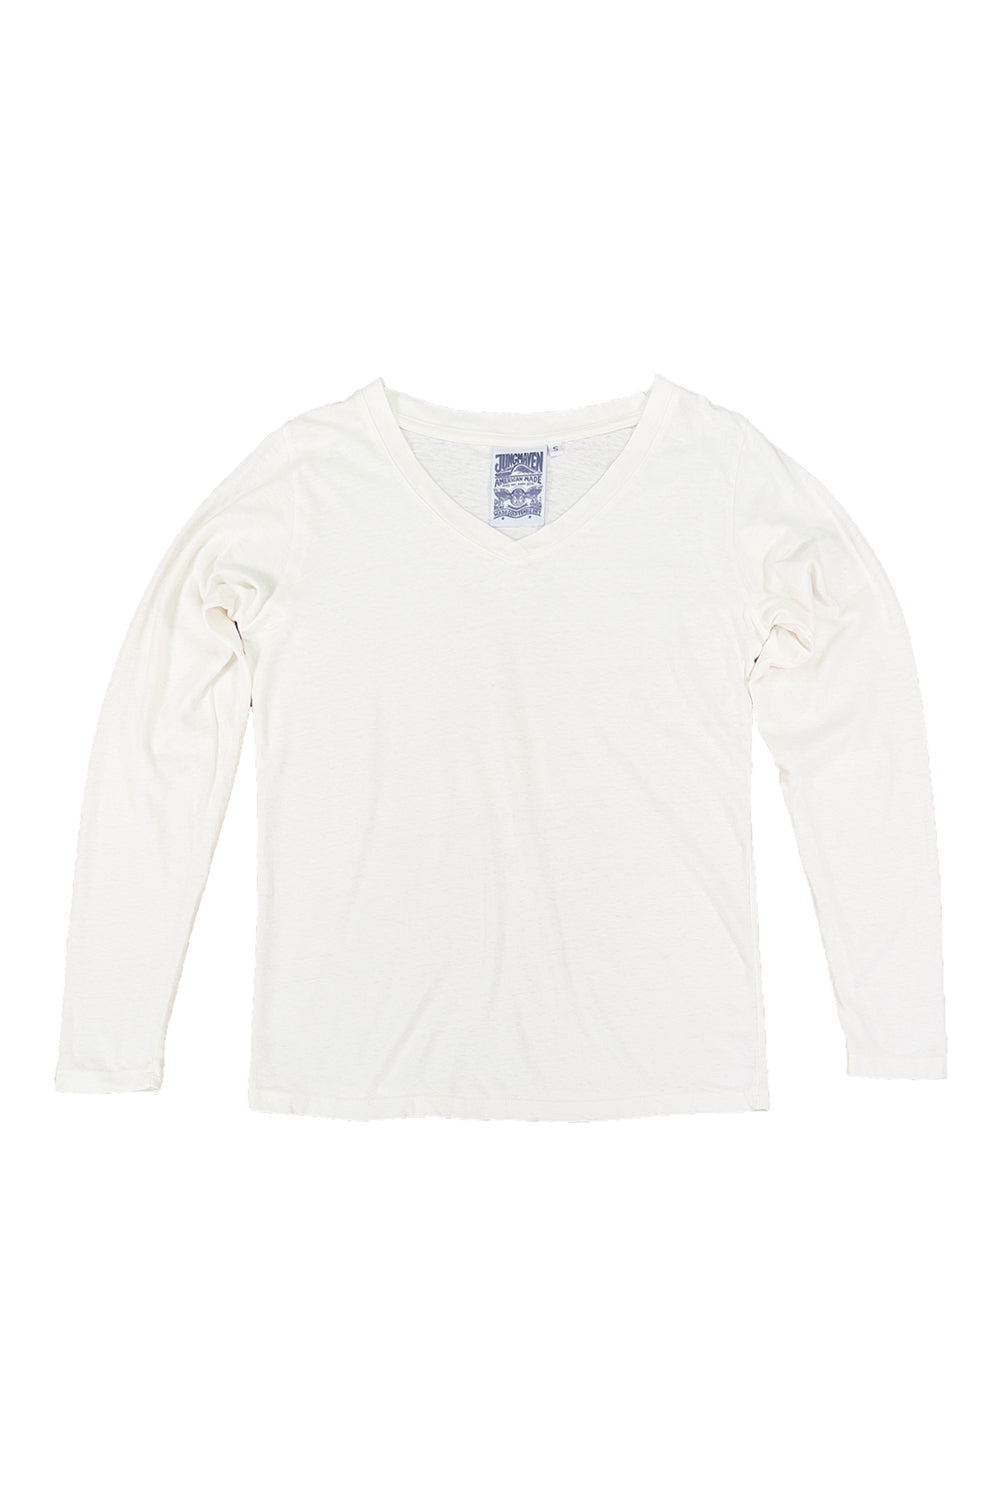 Finch Long Sleeve V-neck | Jungmaven Hemp Clothing & Accessories / Color: Washed White